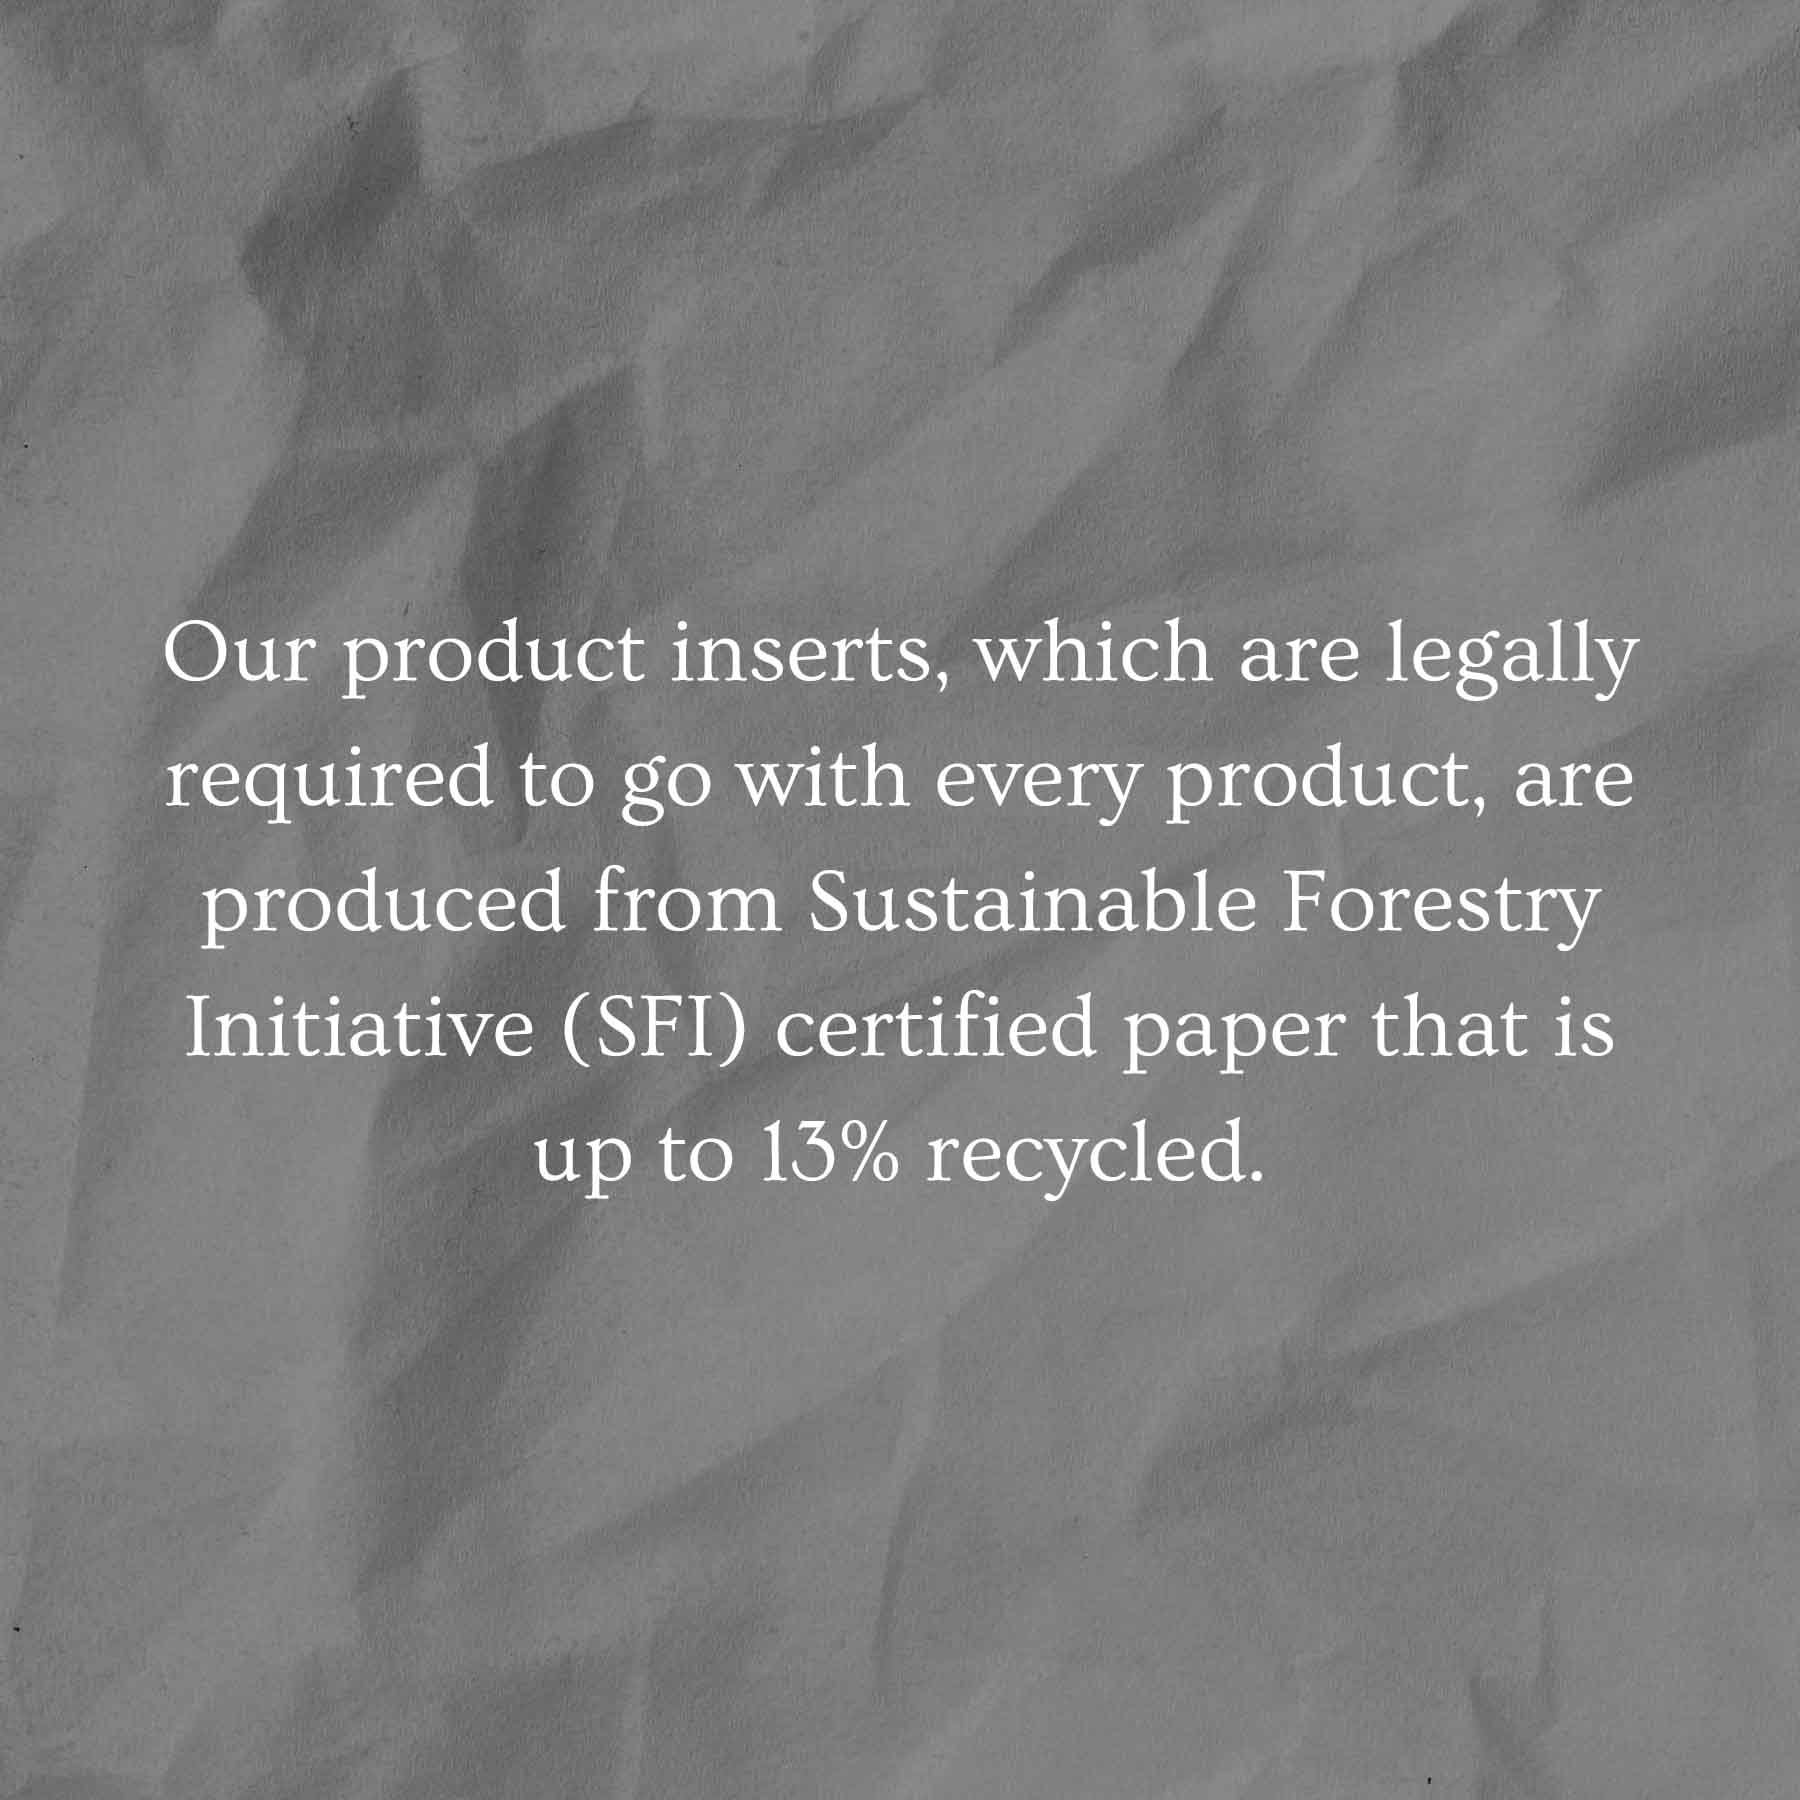 Our product inserts, which are legally required to go with every product, are produced from Sustainable Forestry Initiative (SFI) certified paper that is up to 13% recycled.